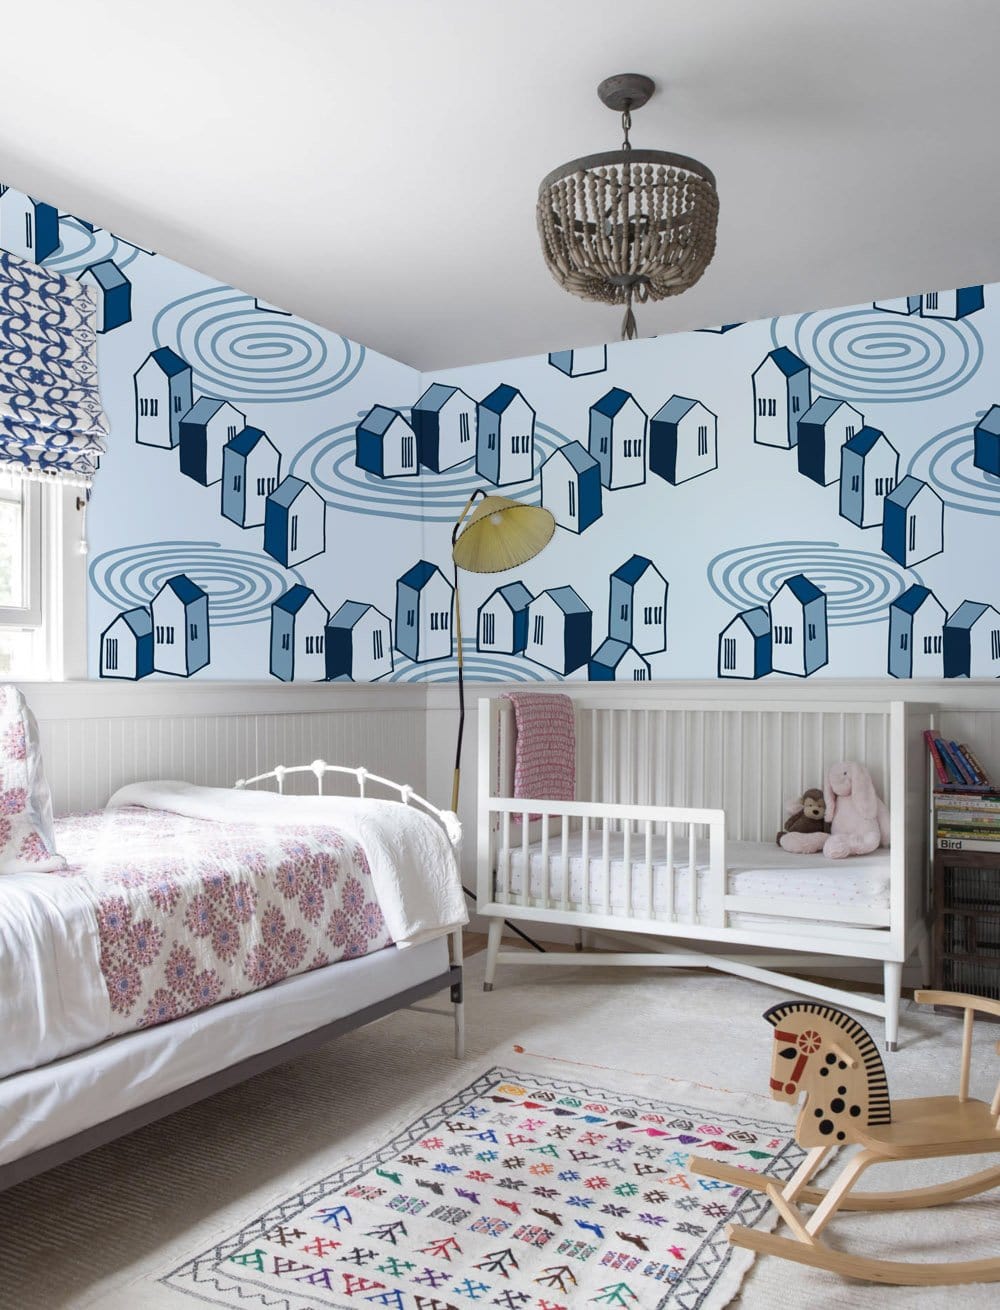 Wallpaper mural with blue group houses, perfect for use as bedroom decor.